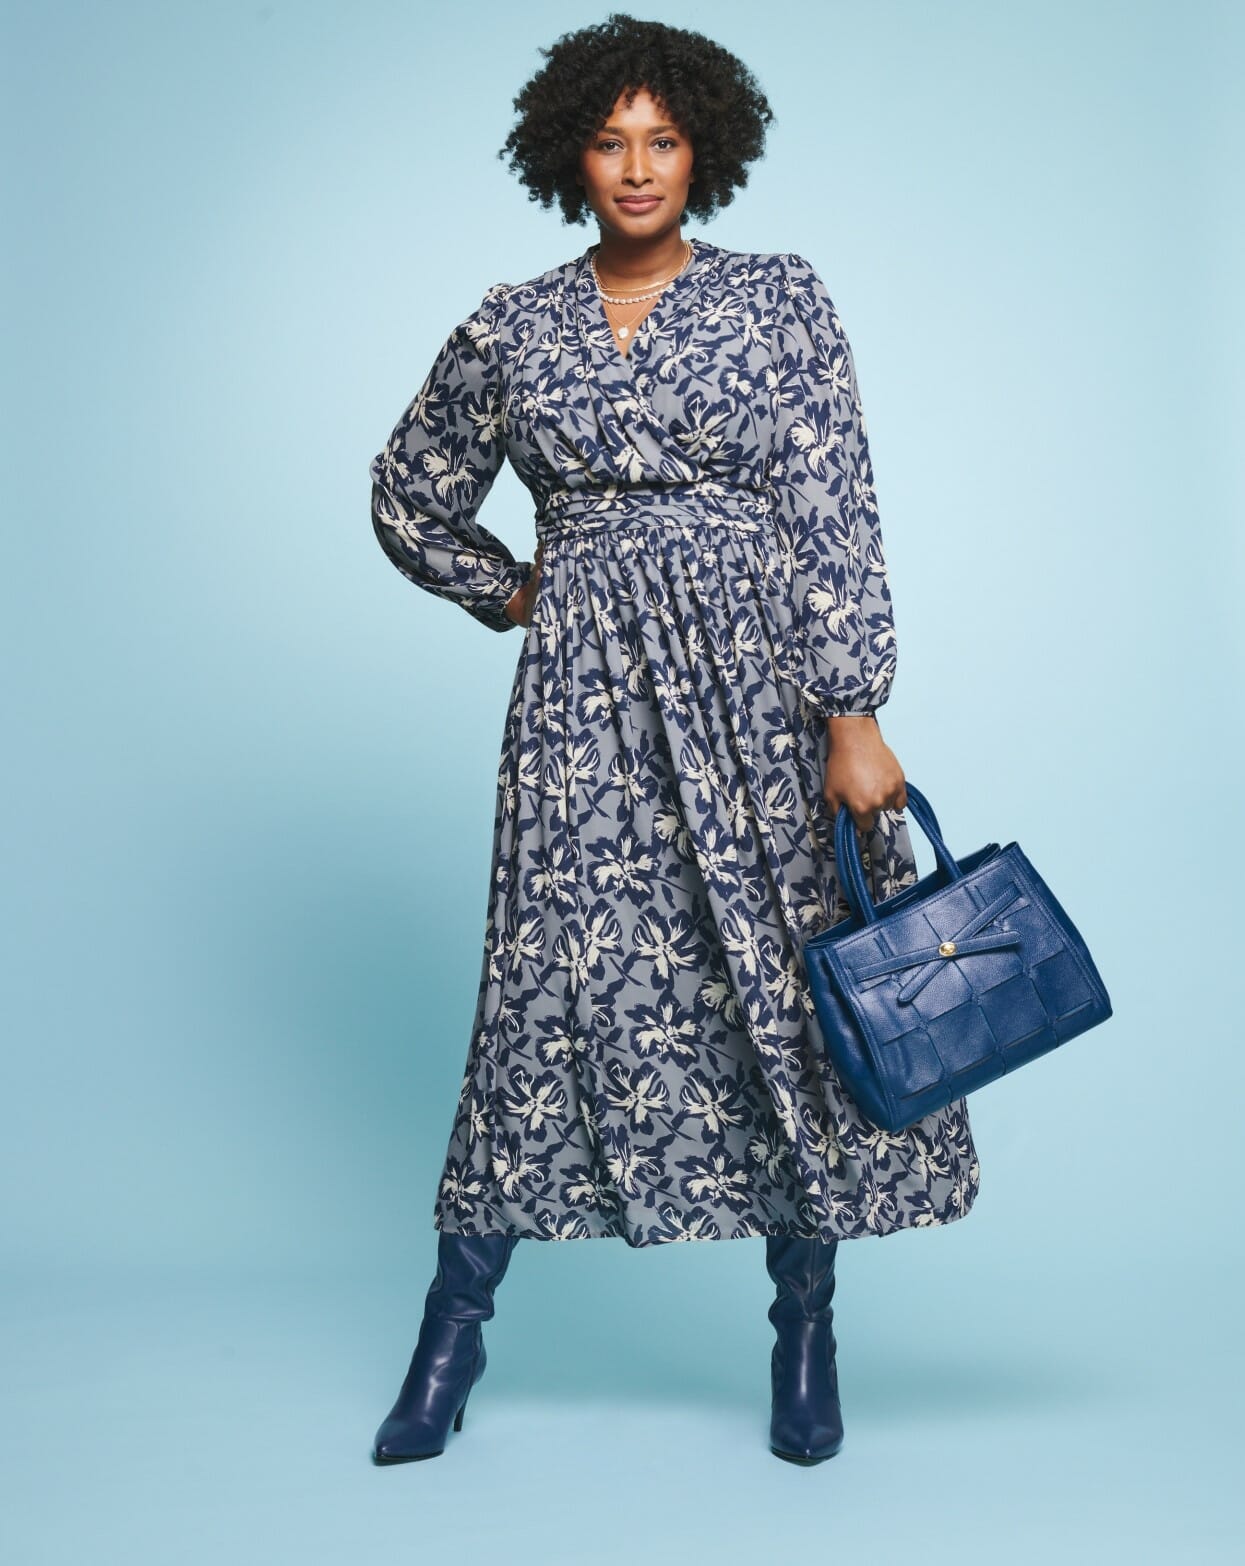 black plus size model wearing a blue floral dress with black leather boots